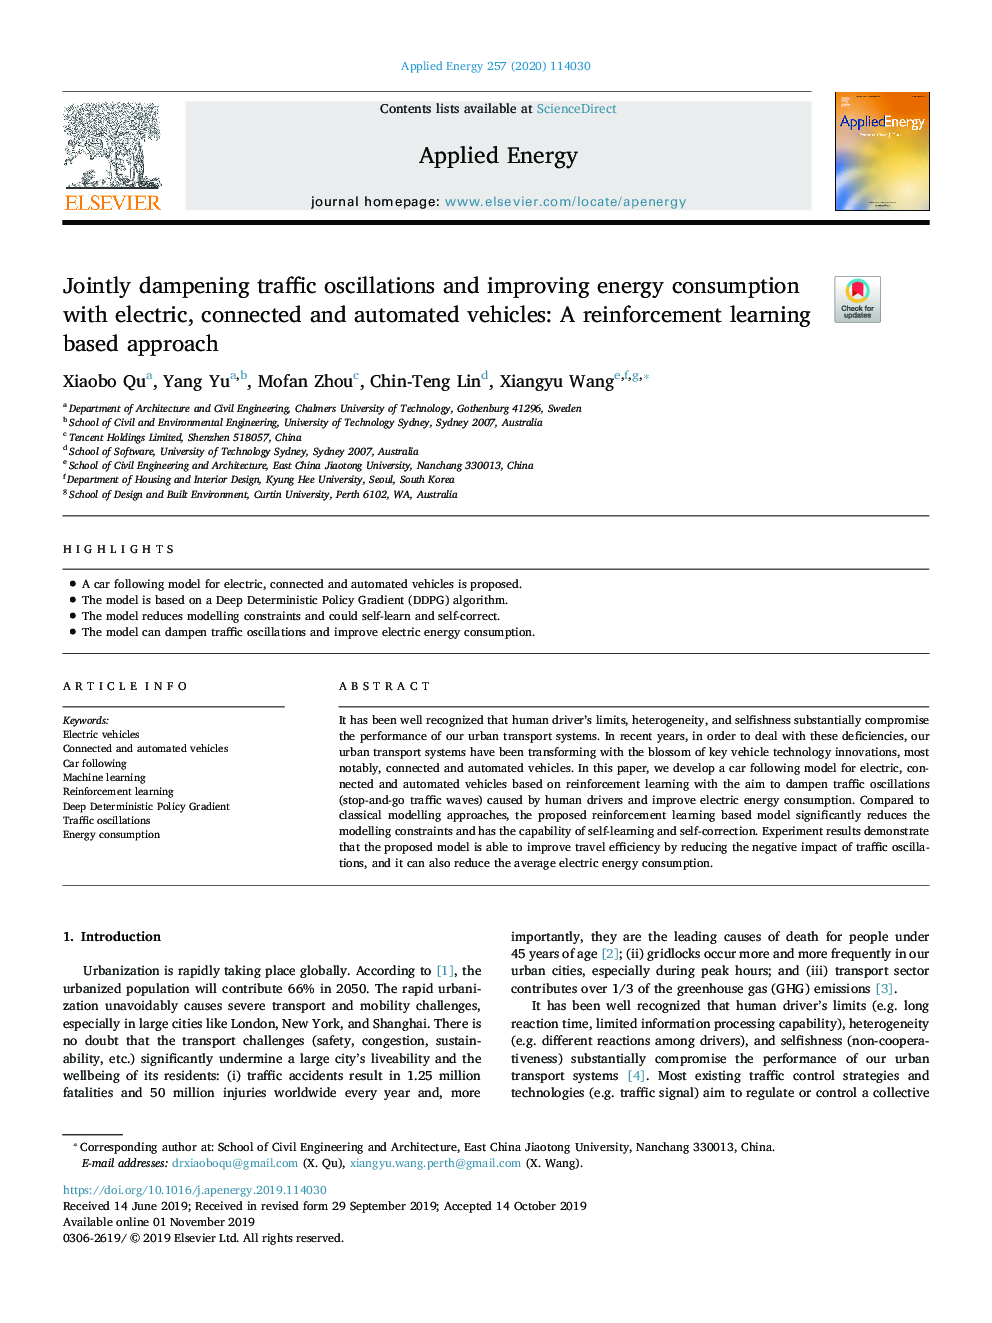 Jointly dampening traffic oscillations and improving energy consumption with electric, connected and automated vehicles: A reinforcement learning based approach